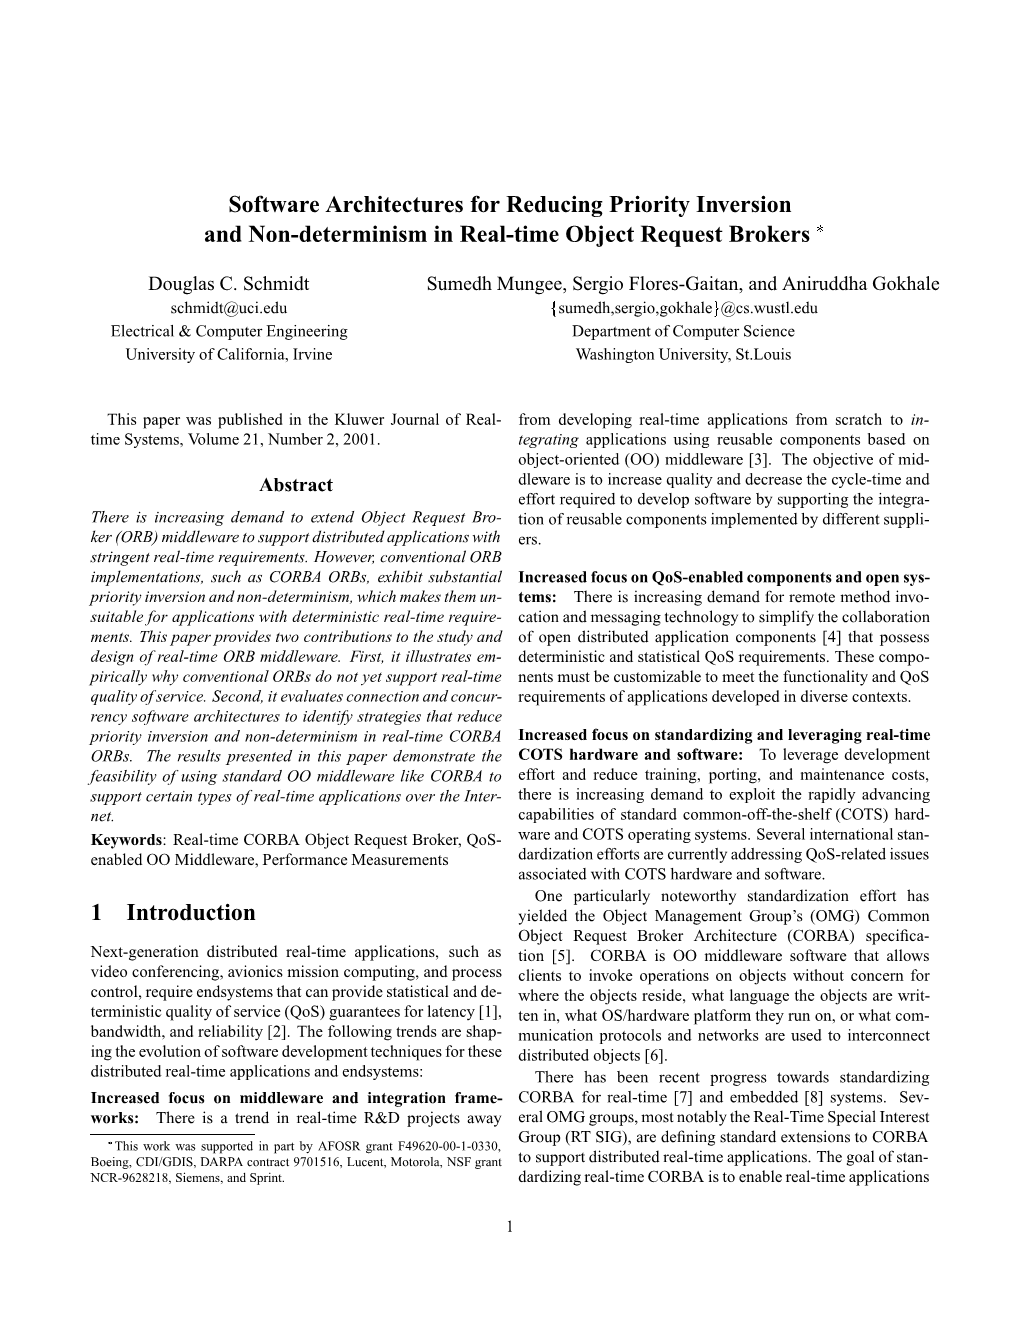 Software Architectures for Reducing Priority Inversion and Non